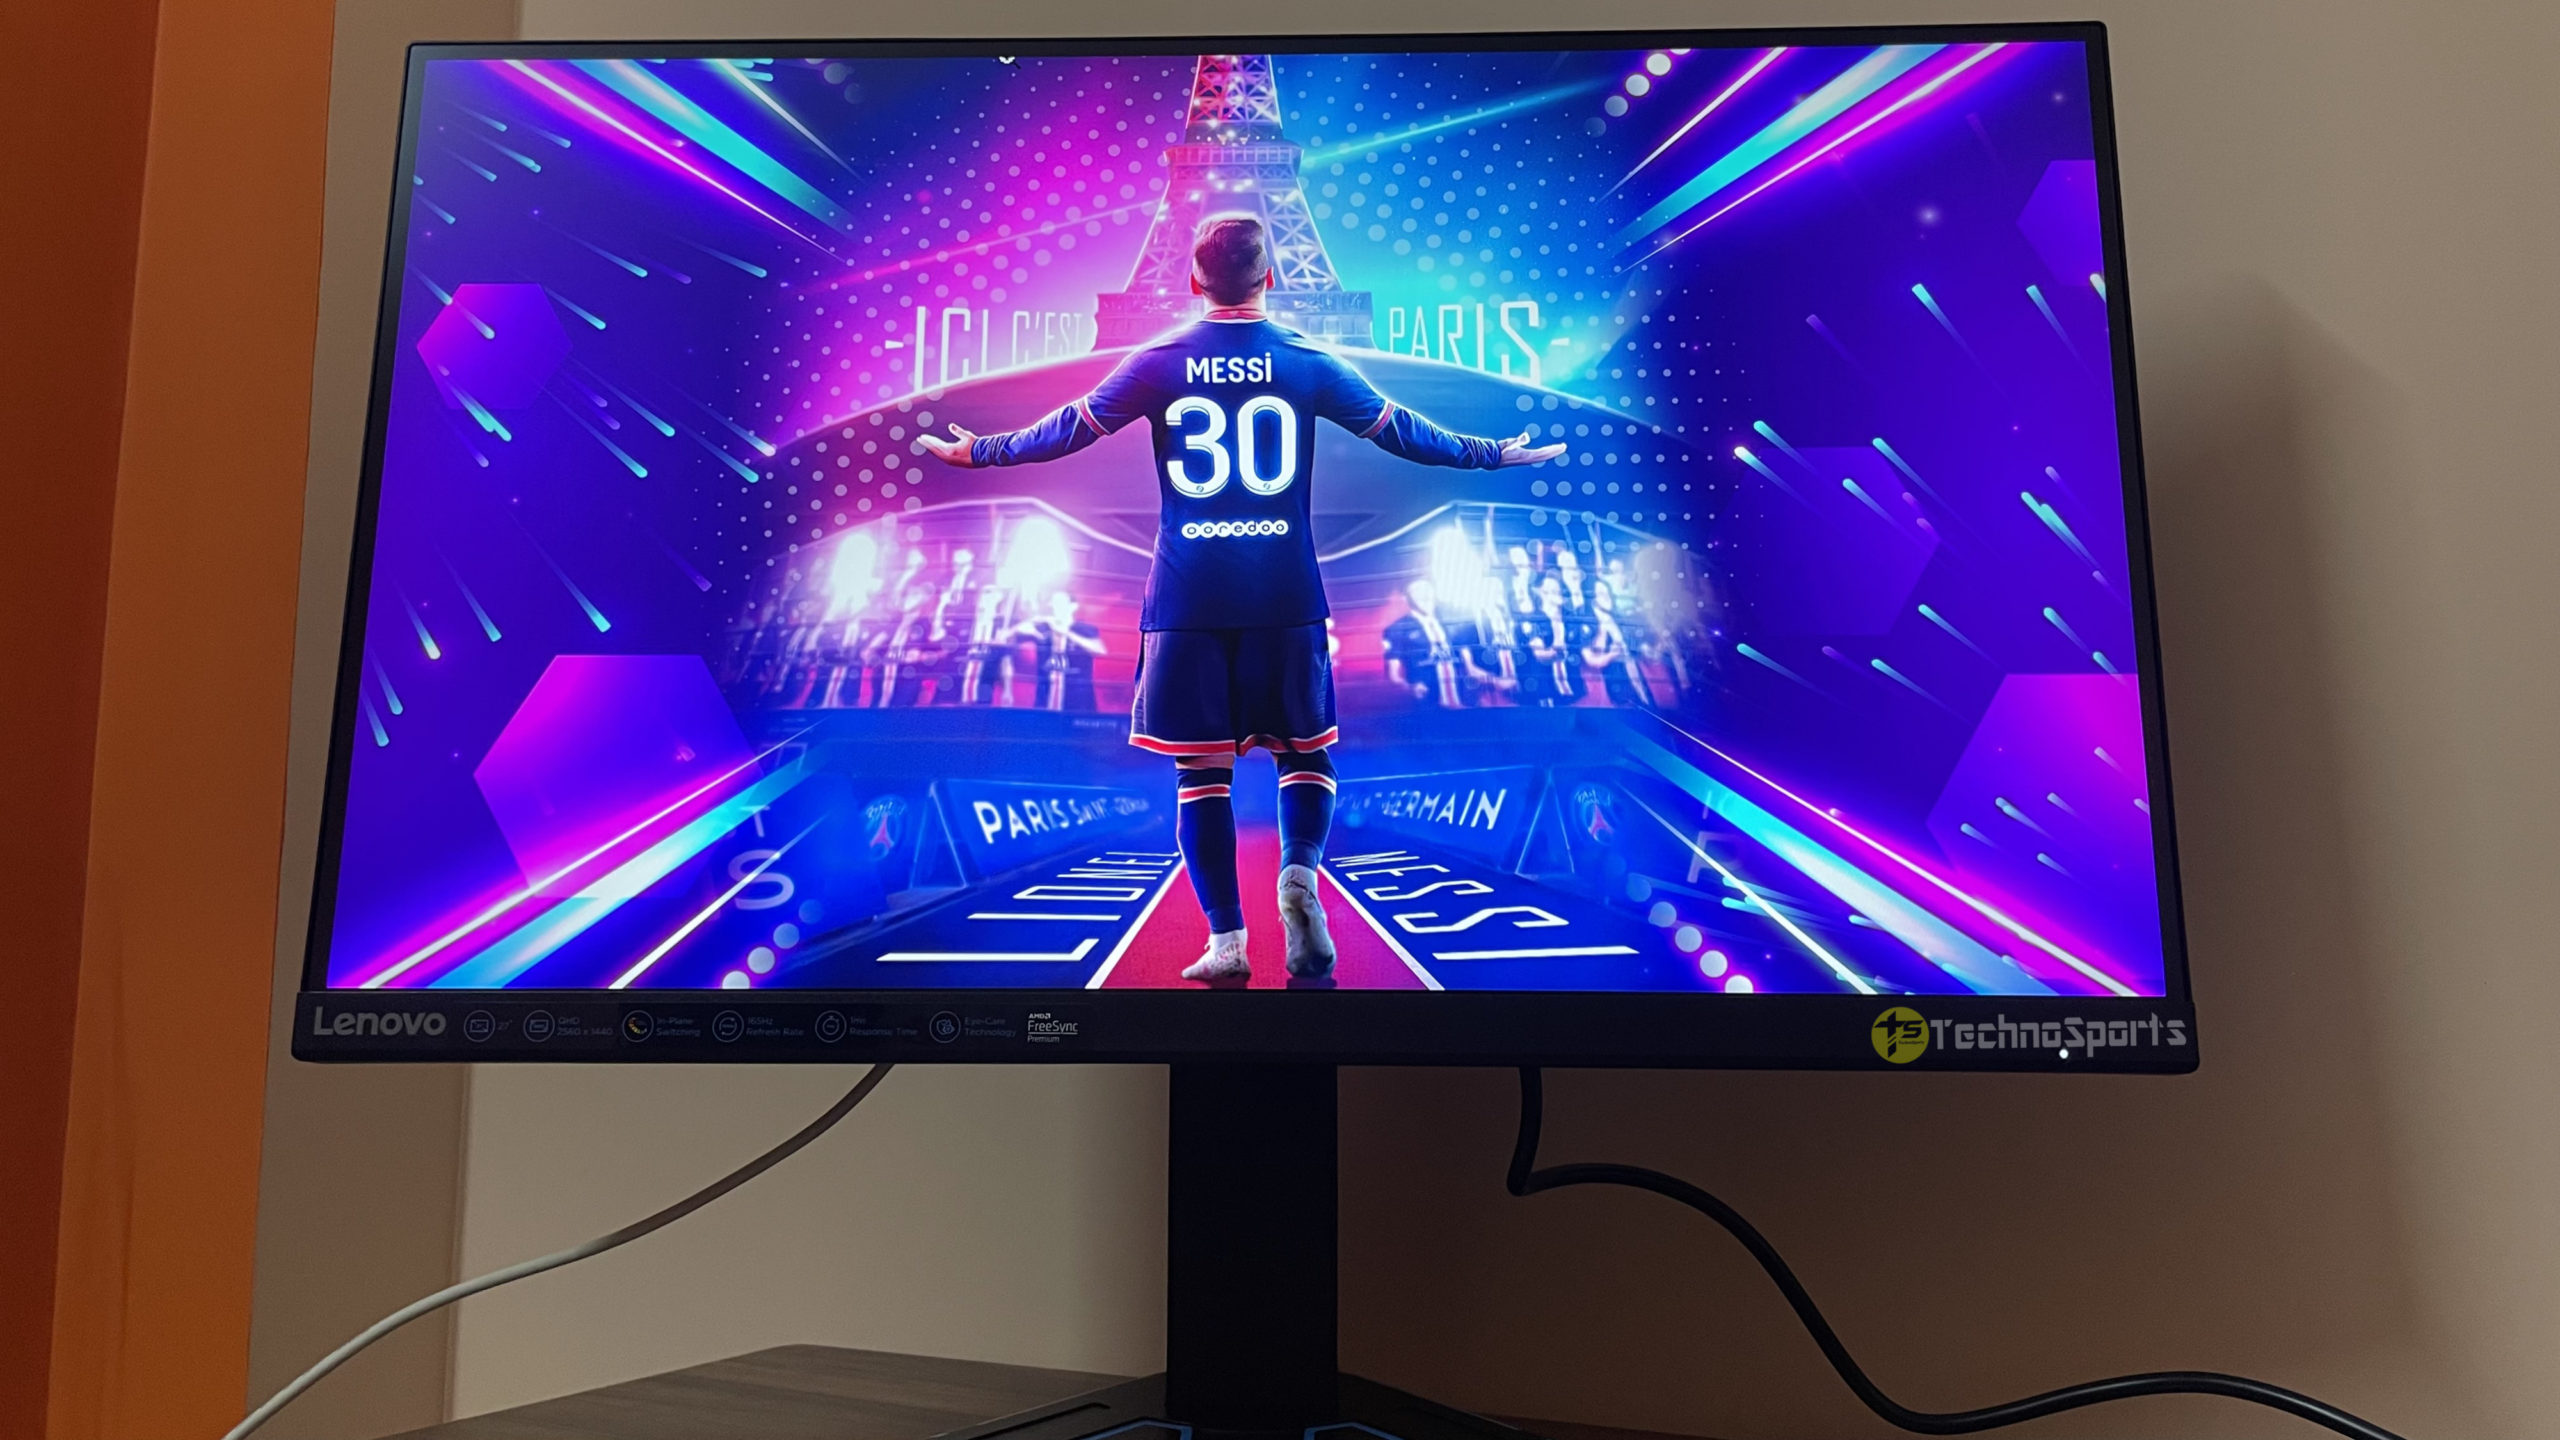 Lenovo G27q-20 QHD Gaming Monitor review: The best for the price